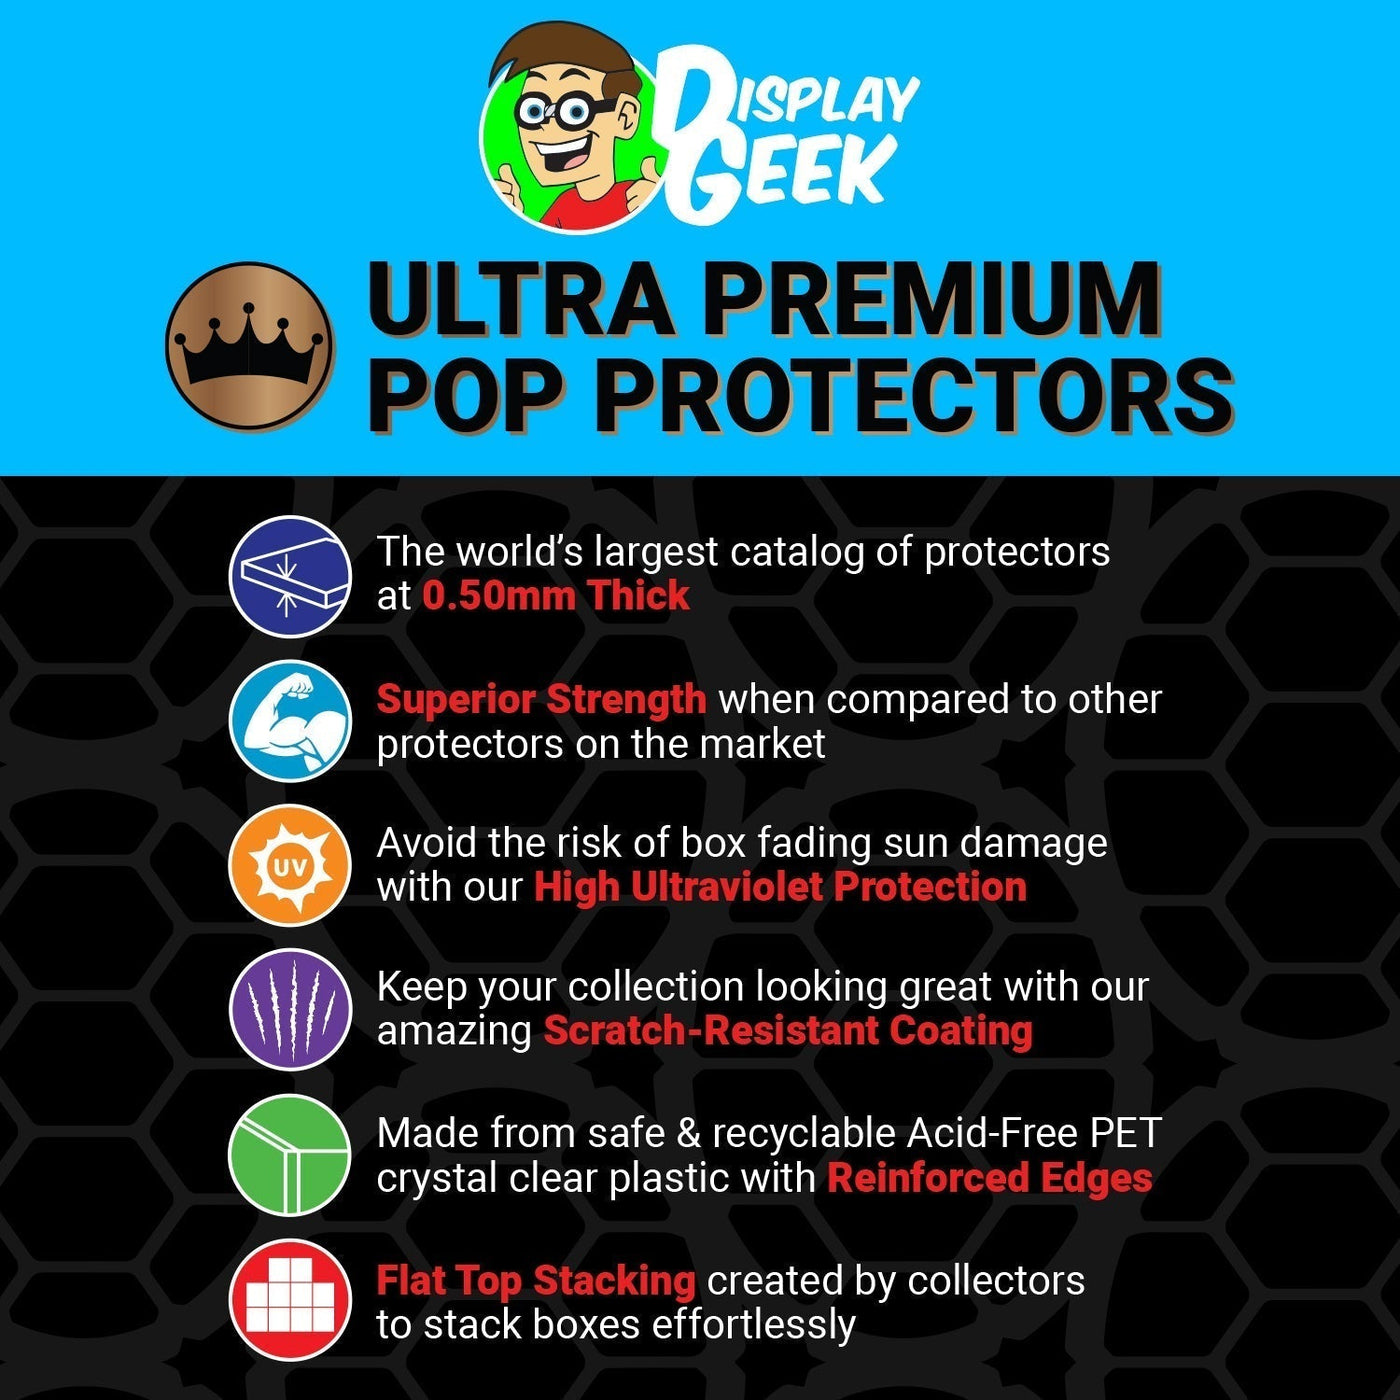 Pop Protector for Dug with Puppies #1098 Funko Pop Deluxe on The Protector Guide App by Display Geek